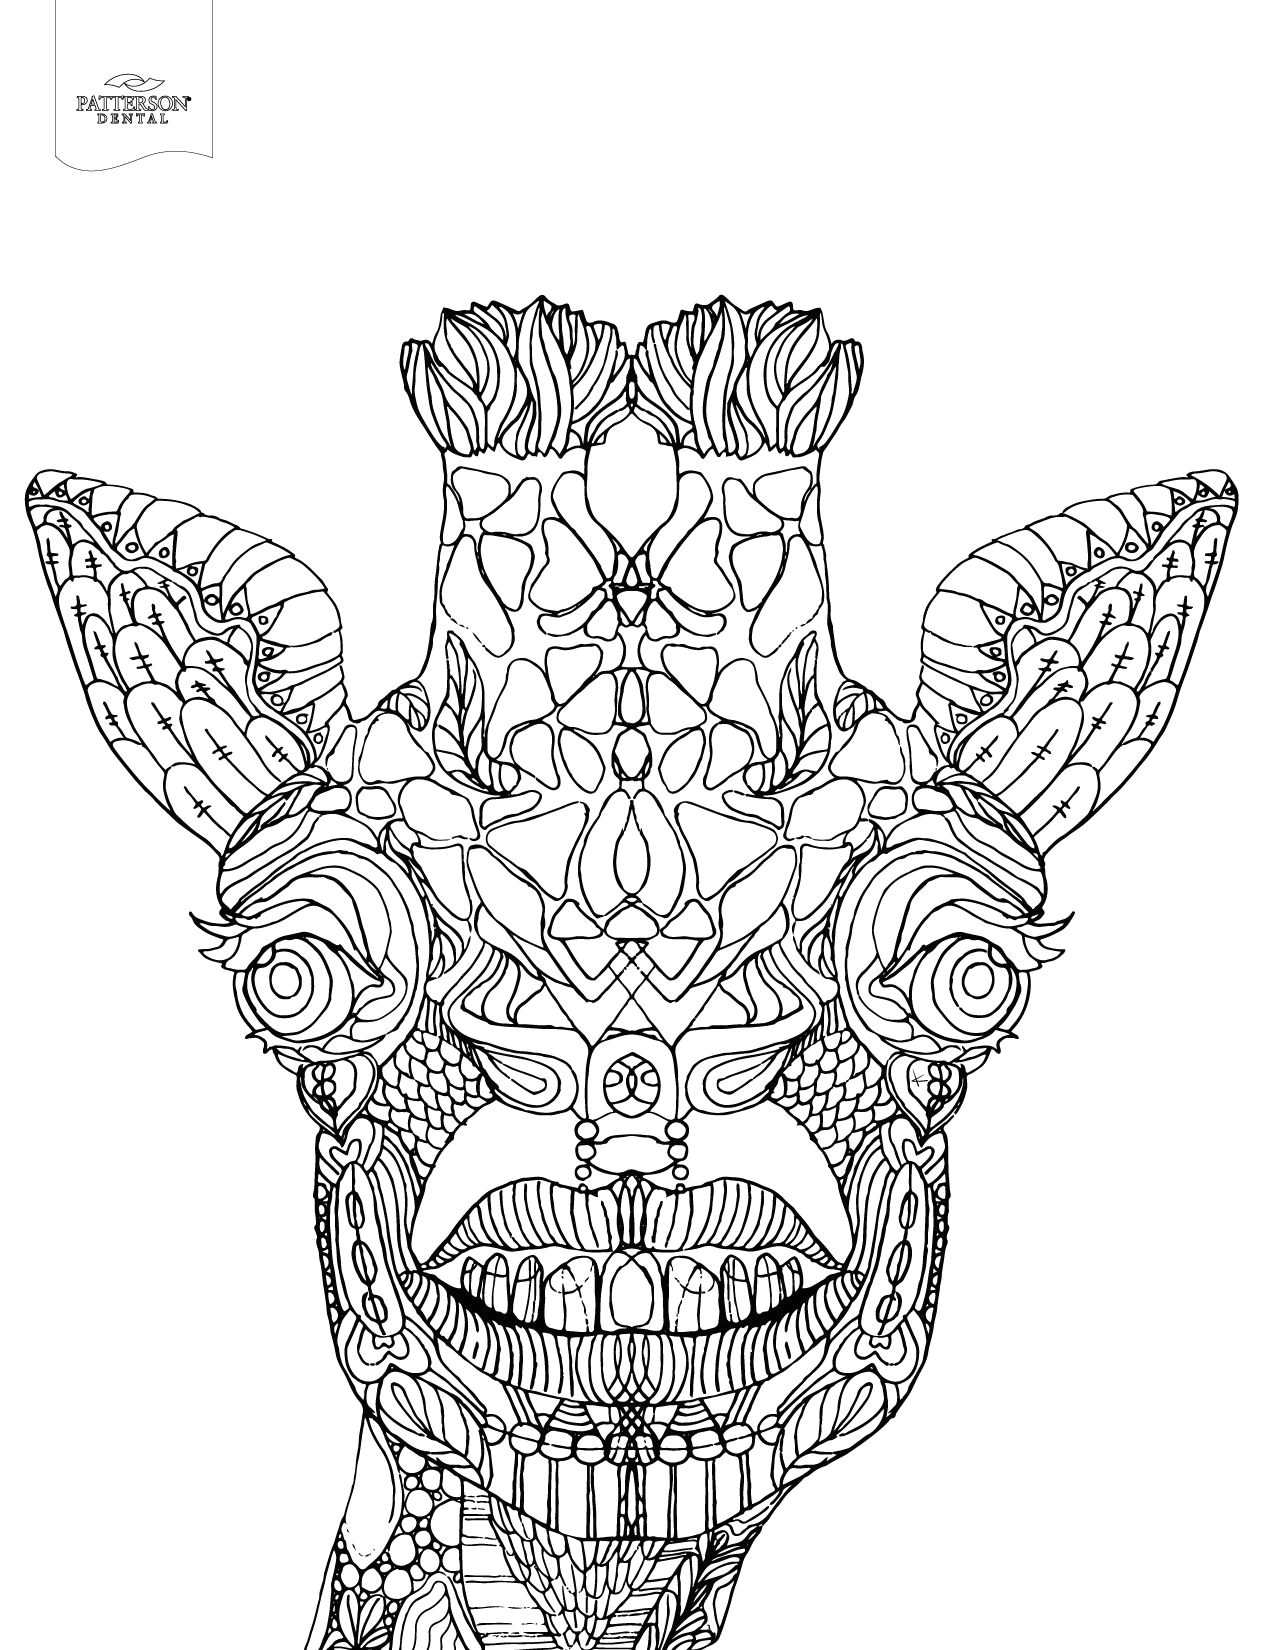 Drawing Giraffe Eyes toothy Giraffe Adult Coloring Book Page Fun Fact Did You Know that